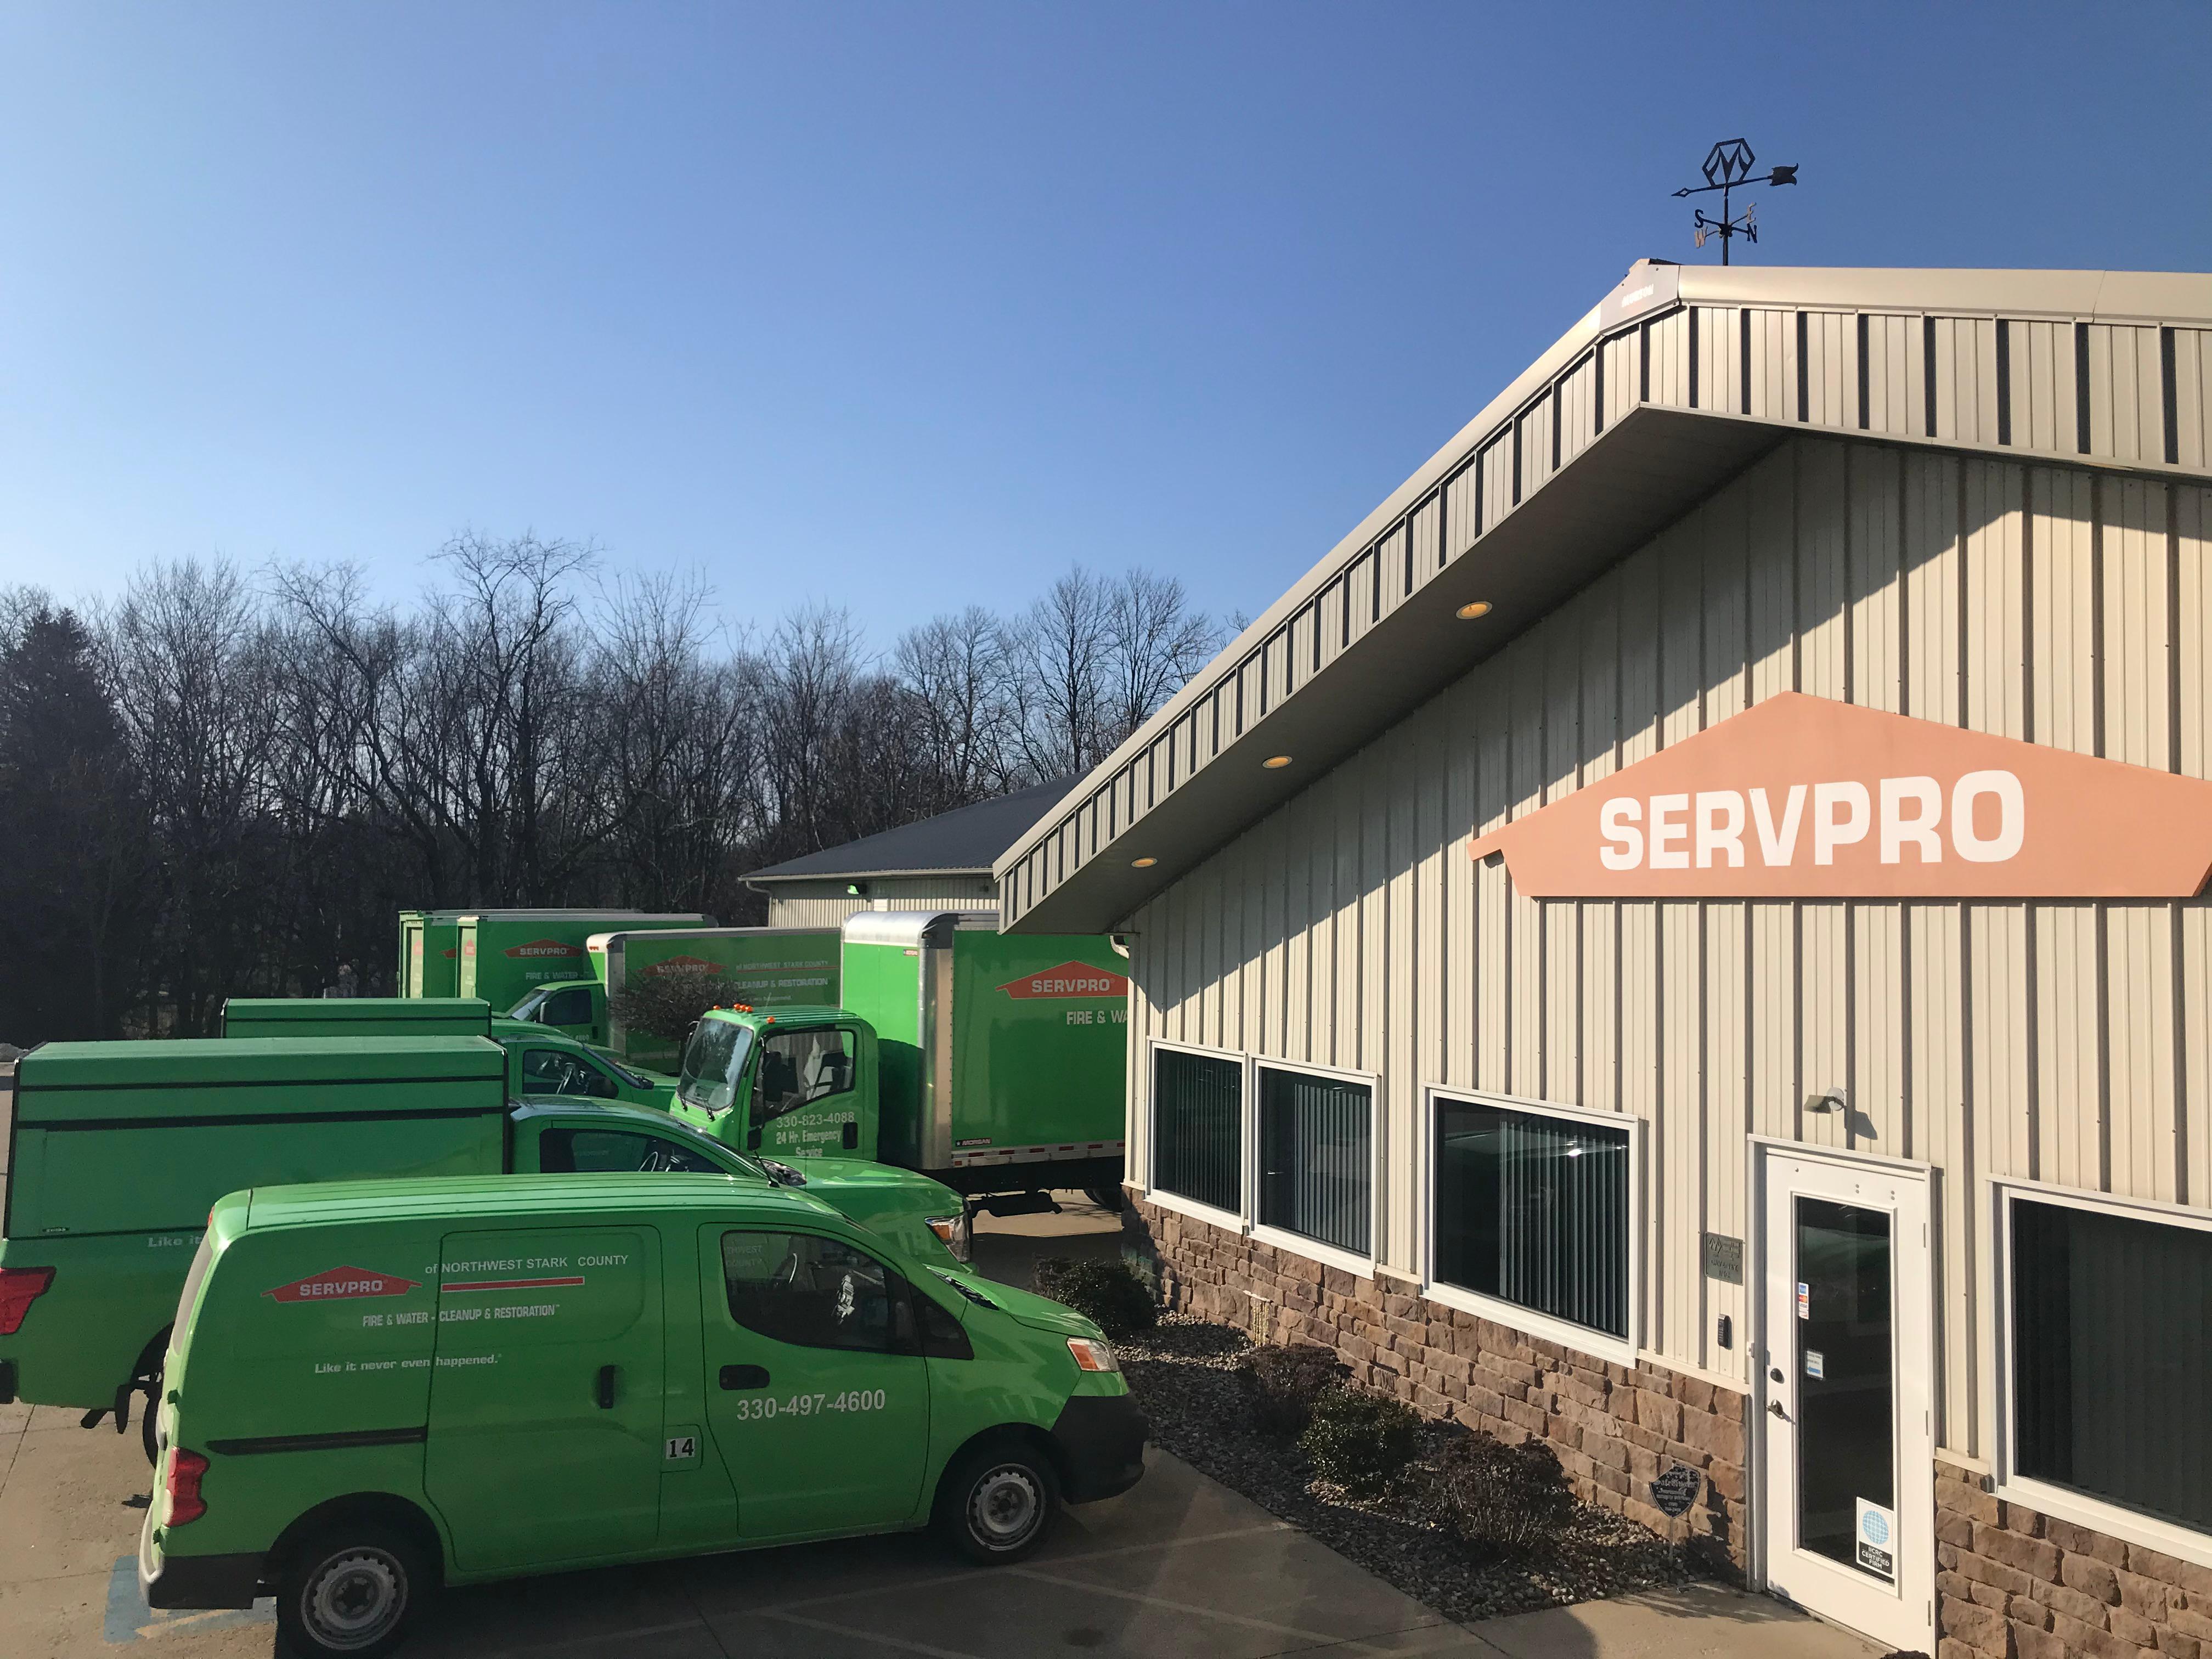 SERVPRO of Northwest Stark County Office, Warehouse and Vehicles.